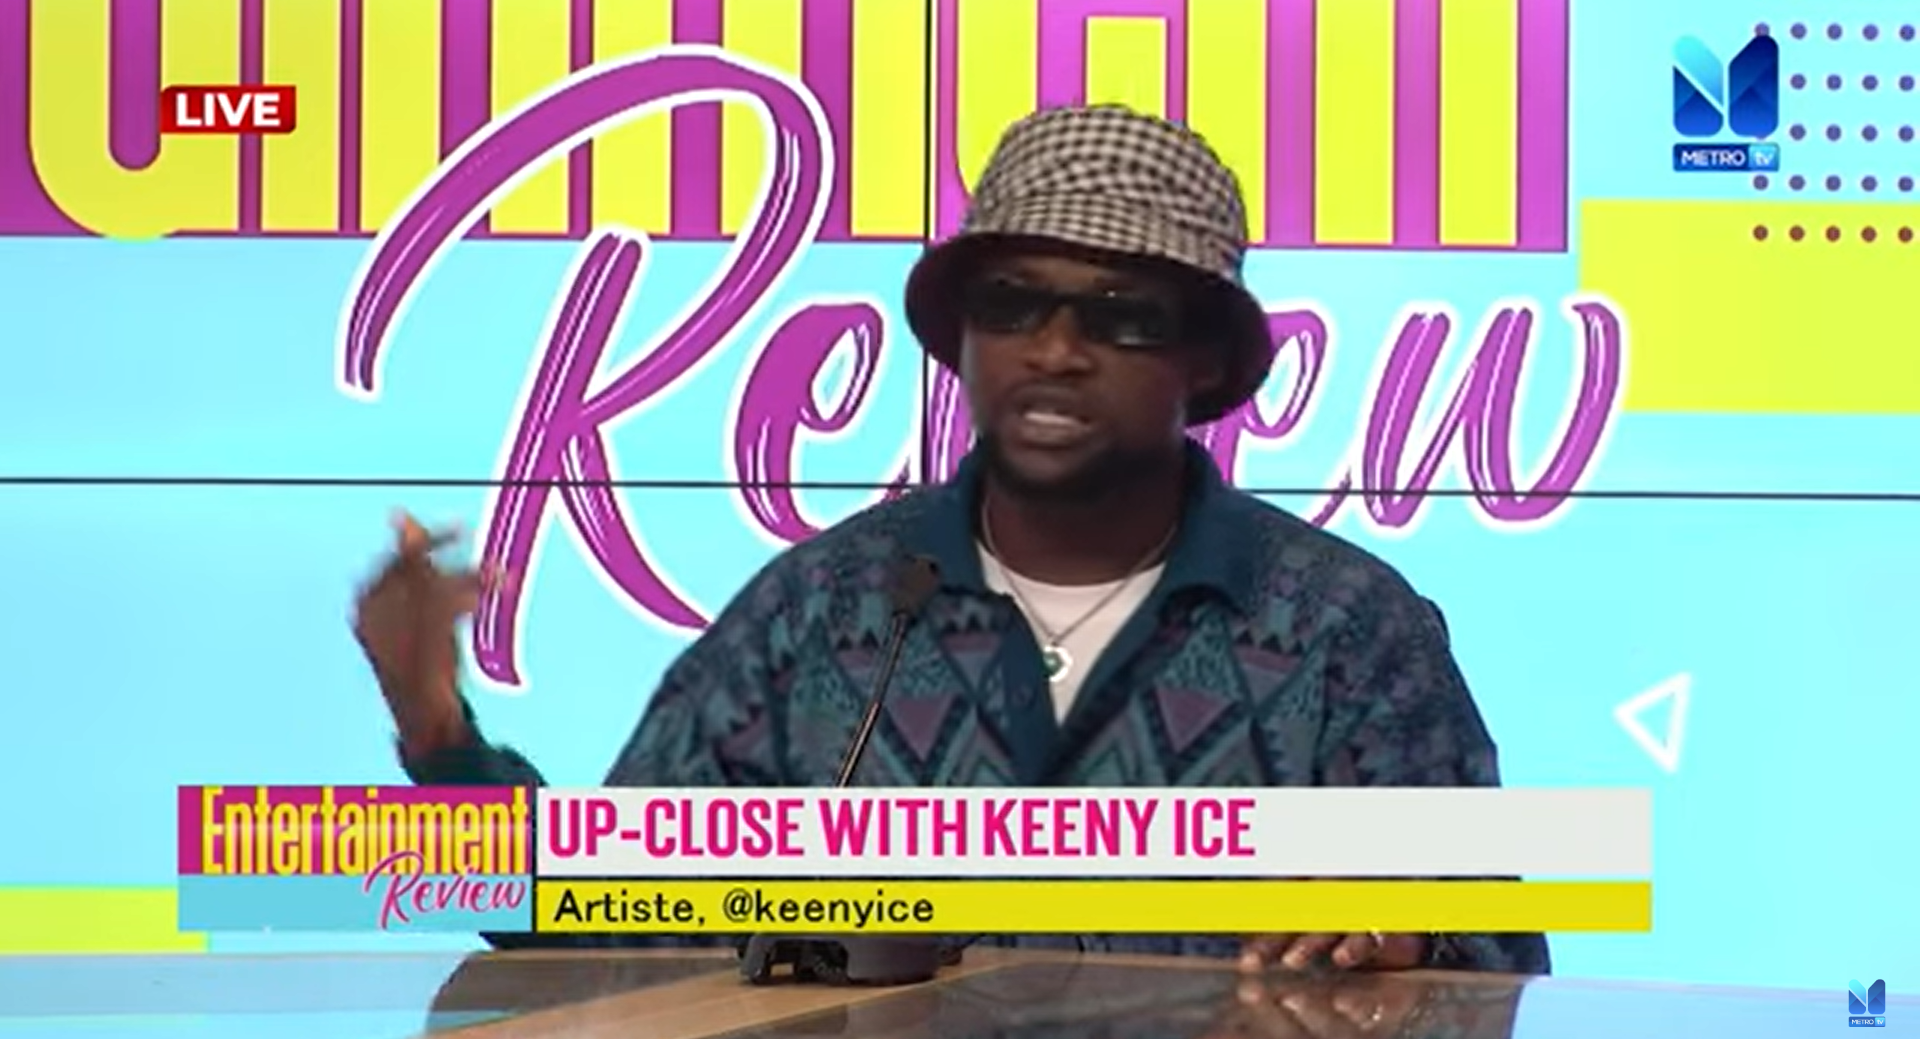 Up-Close with Keeny Ice